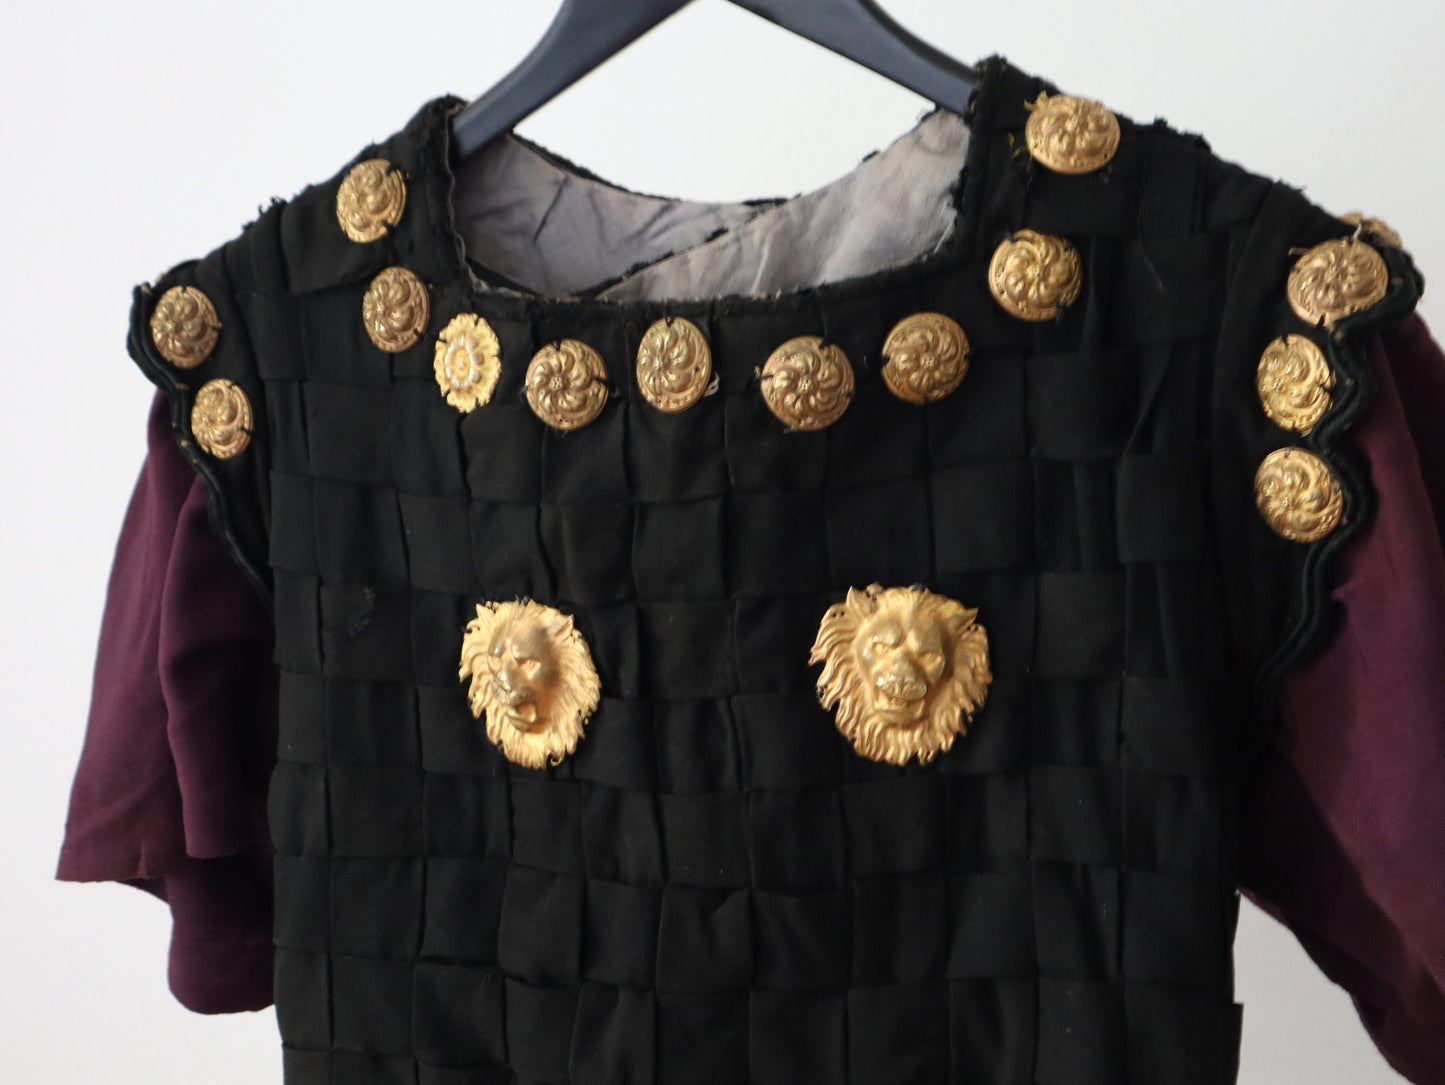 Antique French Opera Costume Centurion Roman Black Wool Gold Metal Lions Early 1900s Theatre